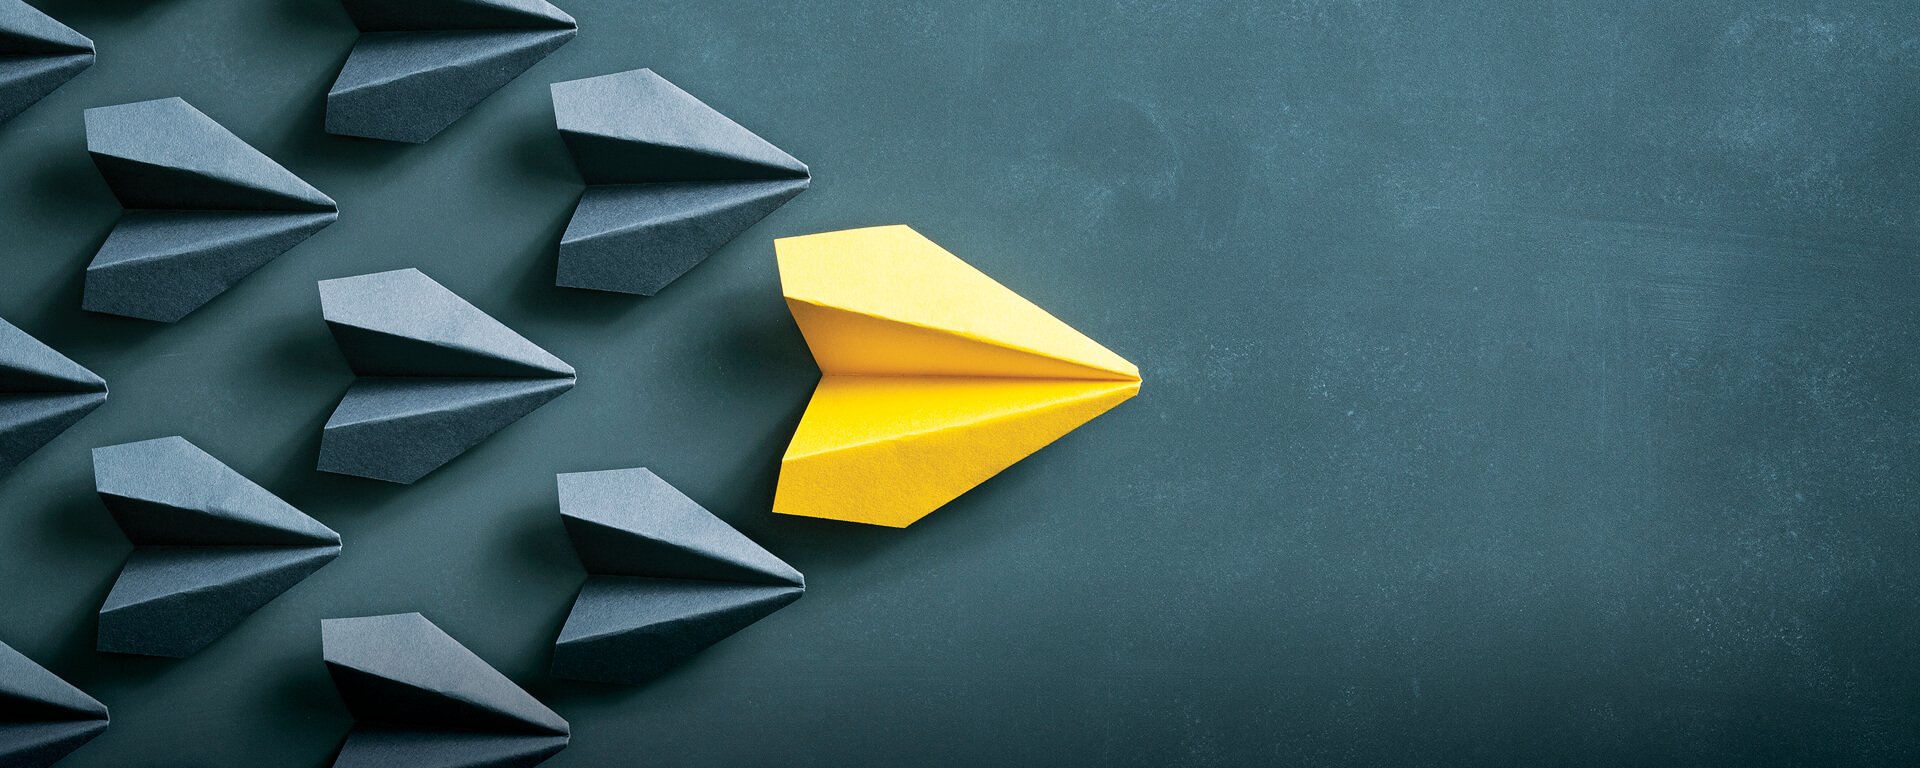 One yellow paper airplane leading a group of gray paper airplanes that blend into the gray background